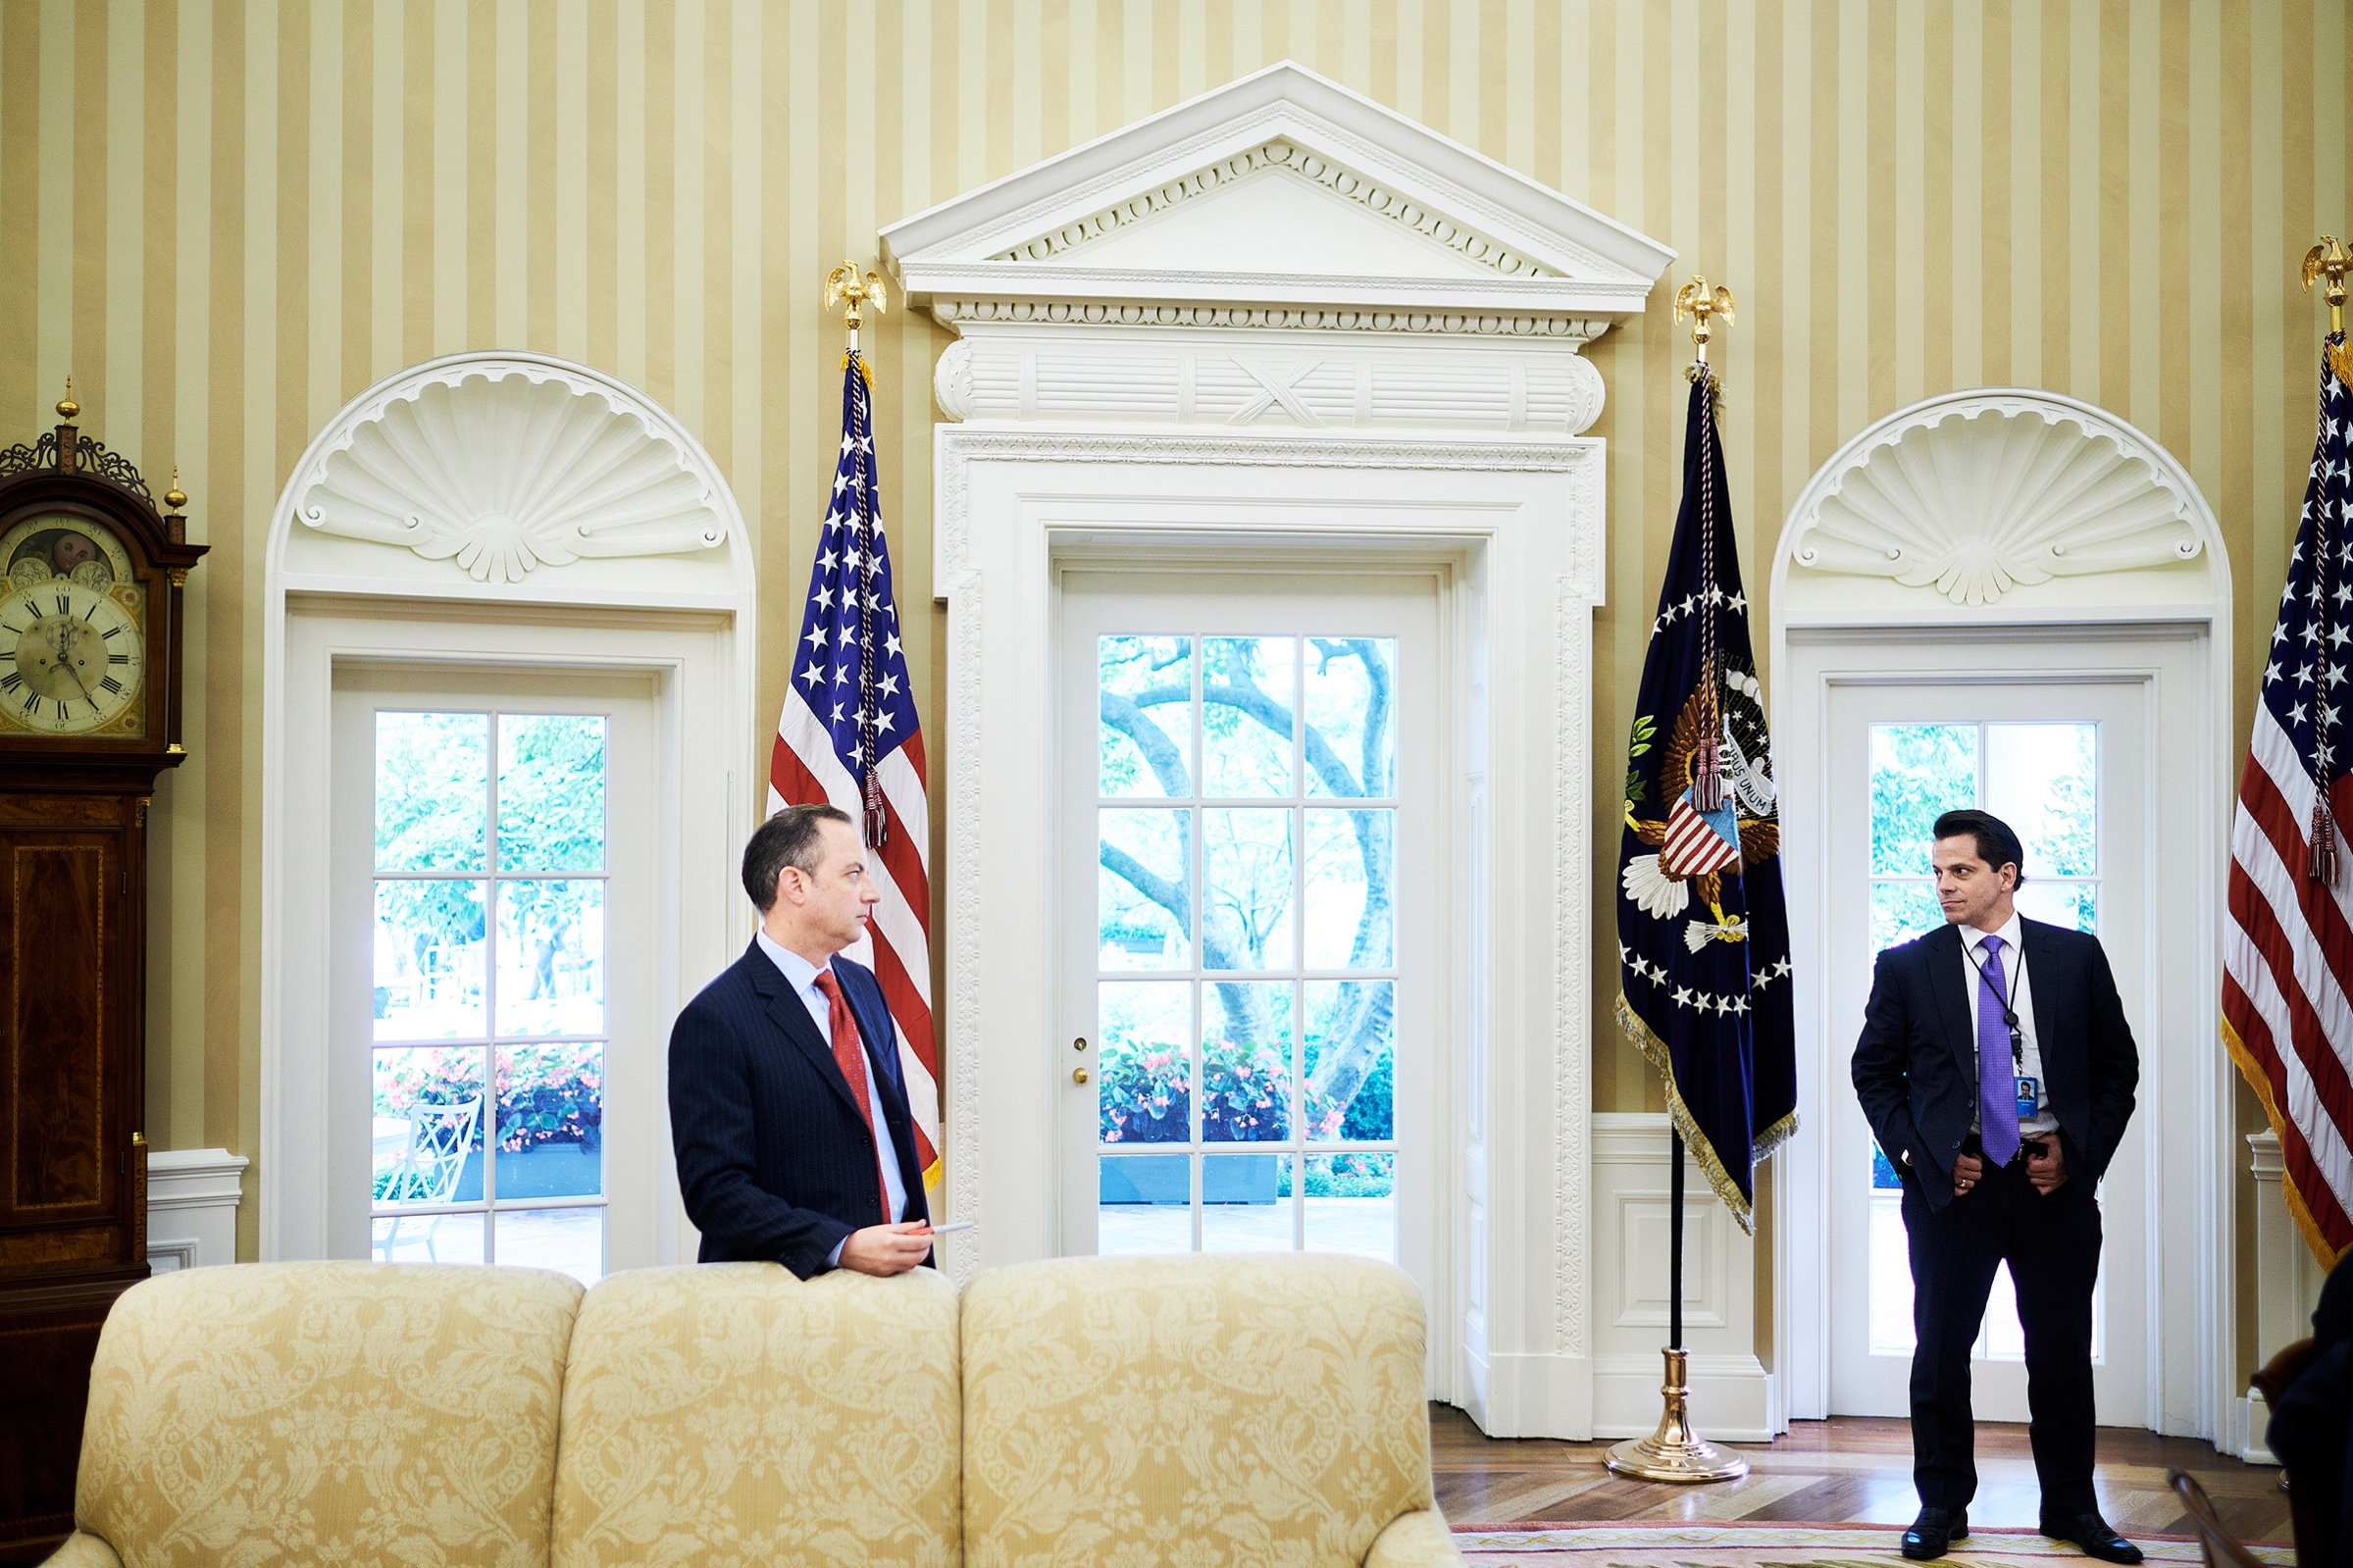 Reince Priebus, the Chief of Staff, and White House Communications Director Anthony Scaramucci in the Oval Office on July 25, 2017.